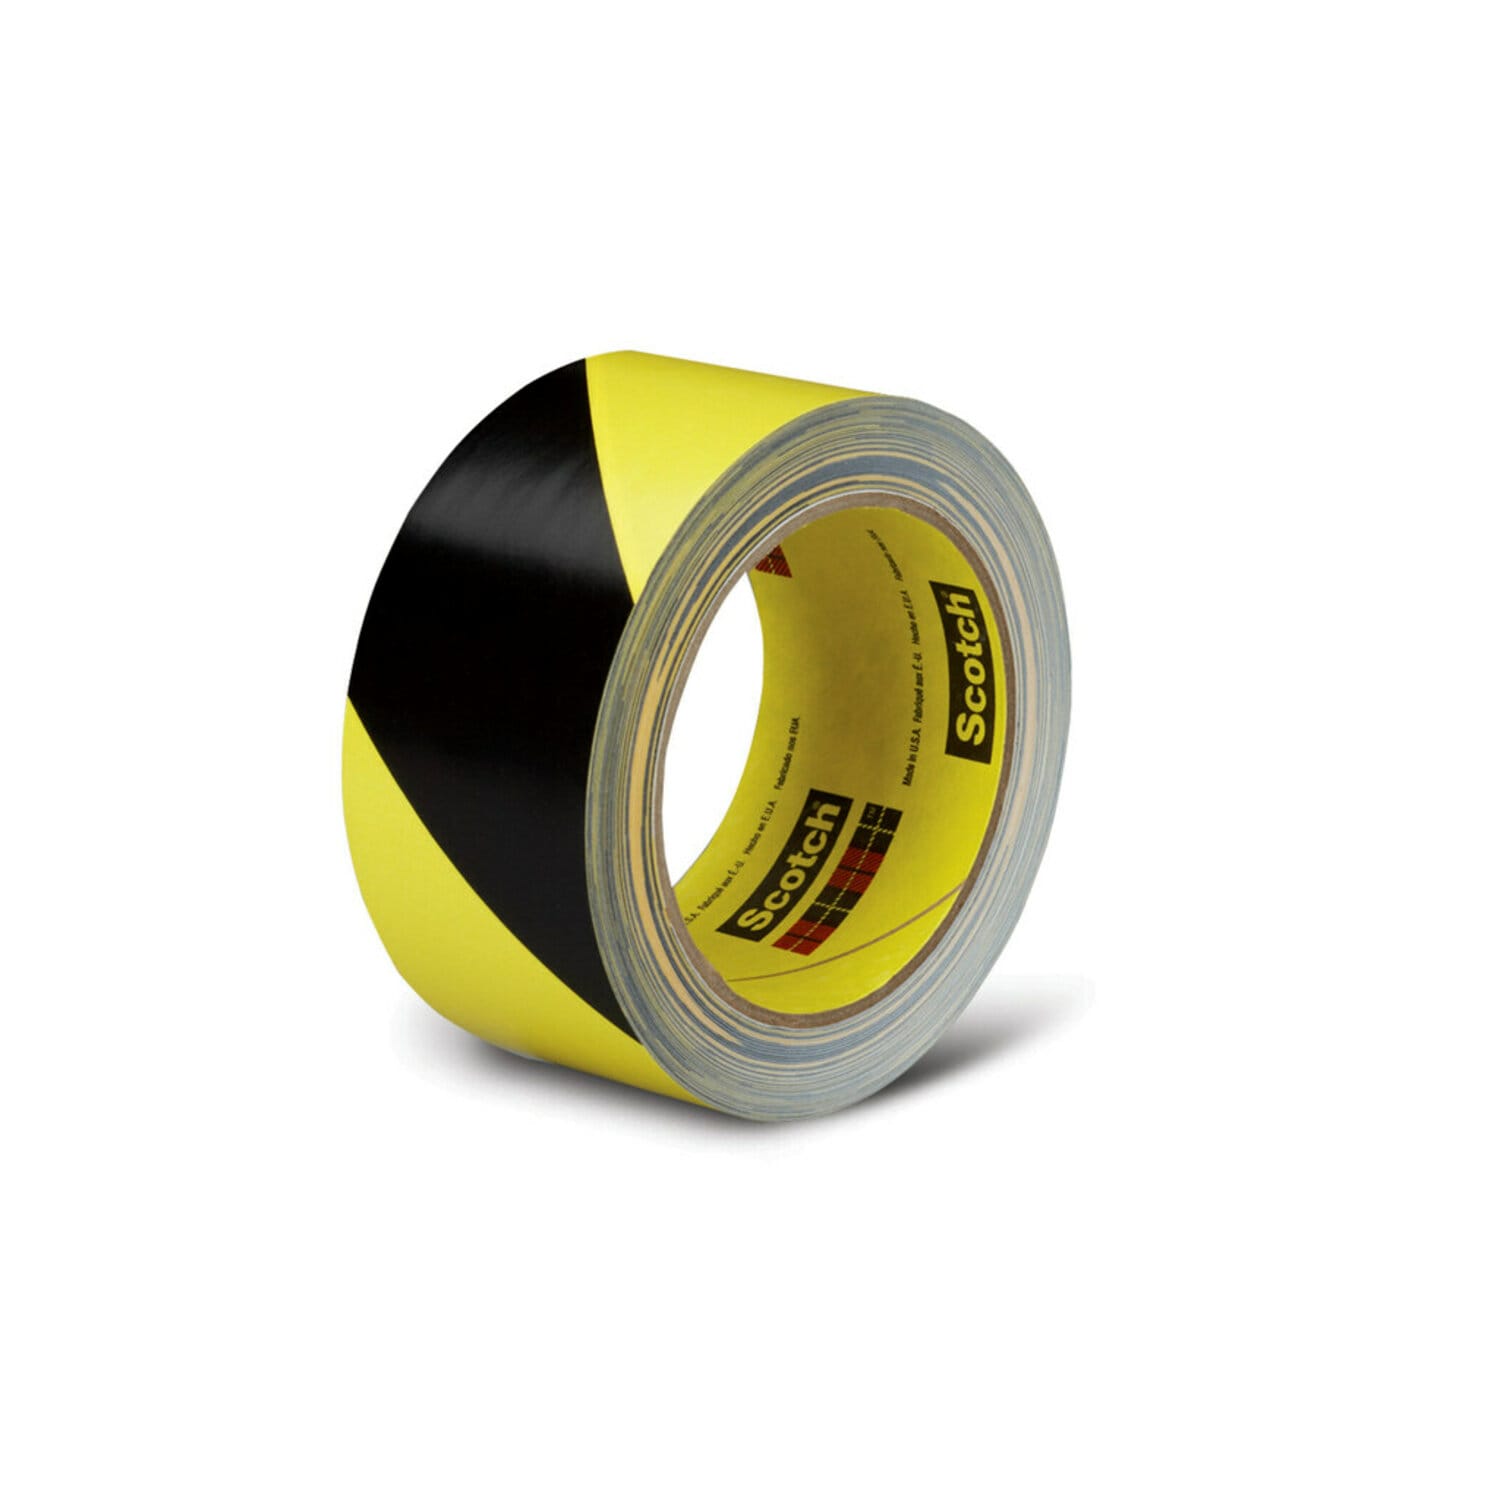 7100132851 - 3M Safety Stripe Tape 5702, Black/Yellow, 5.4 mil, Roll, Config